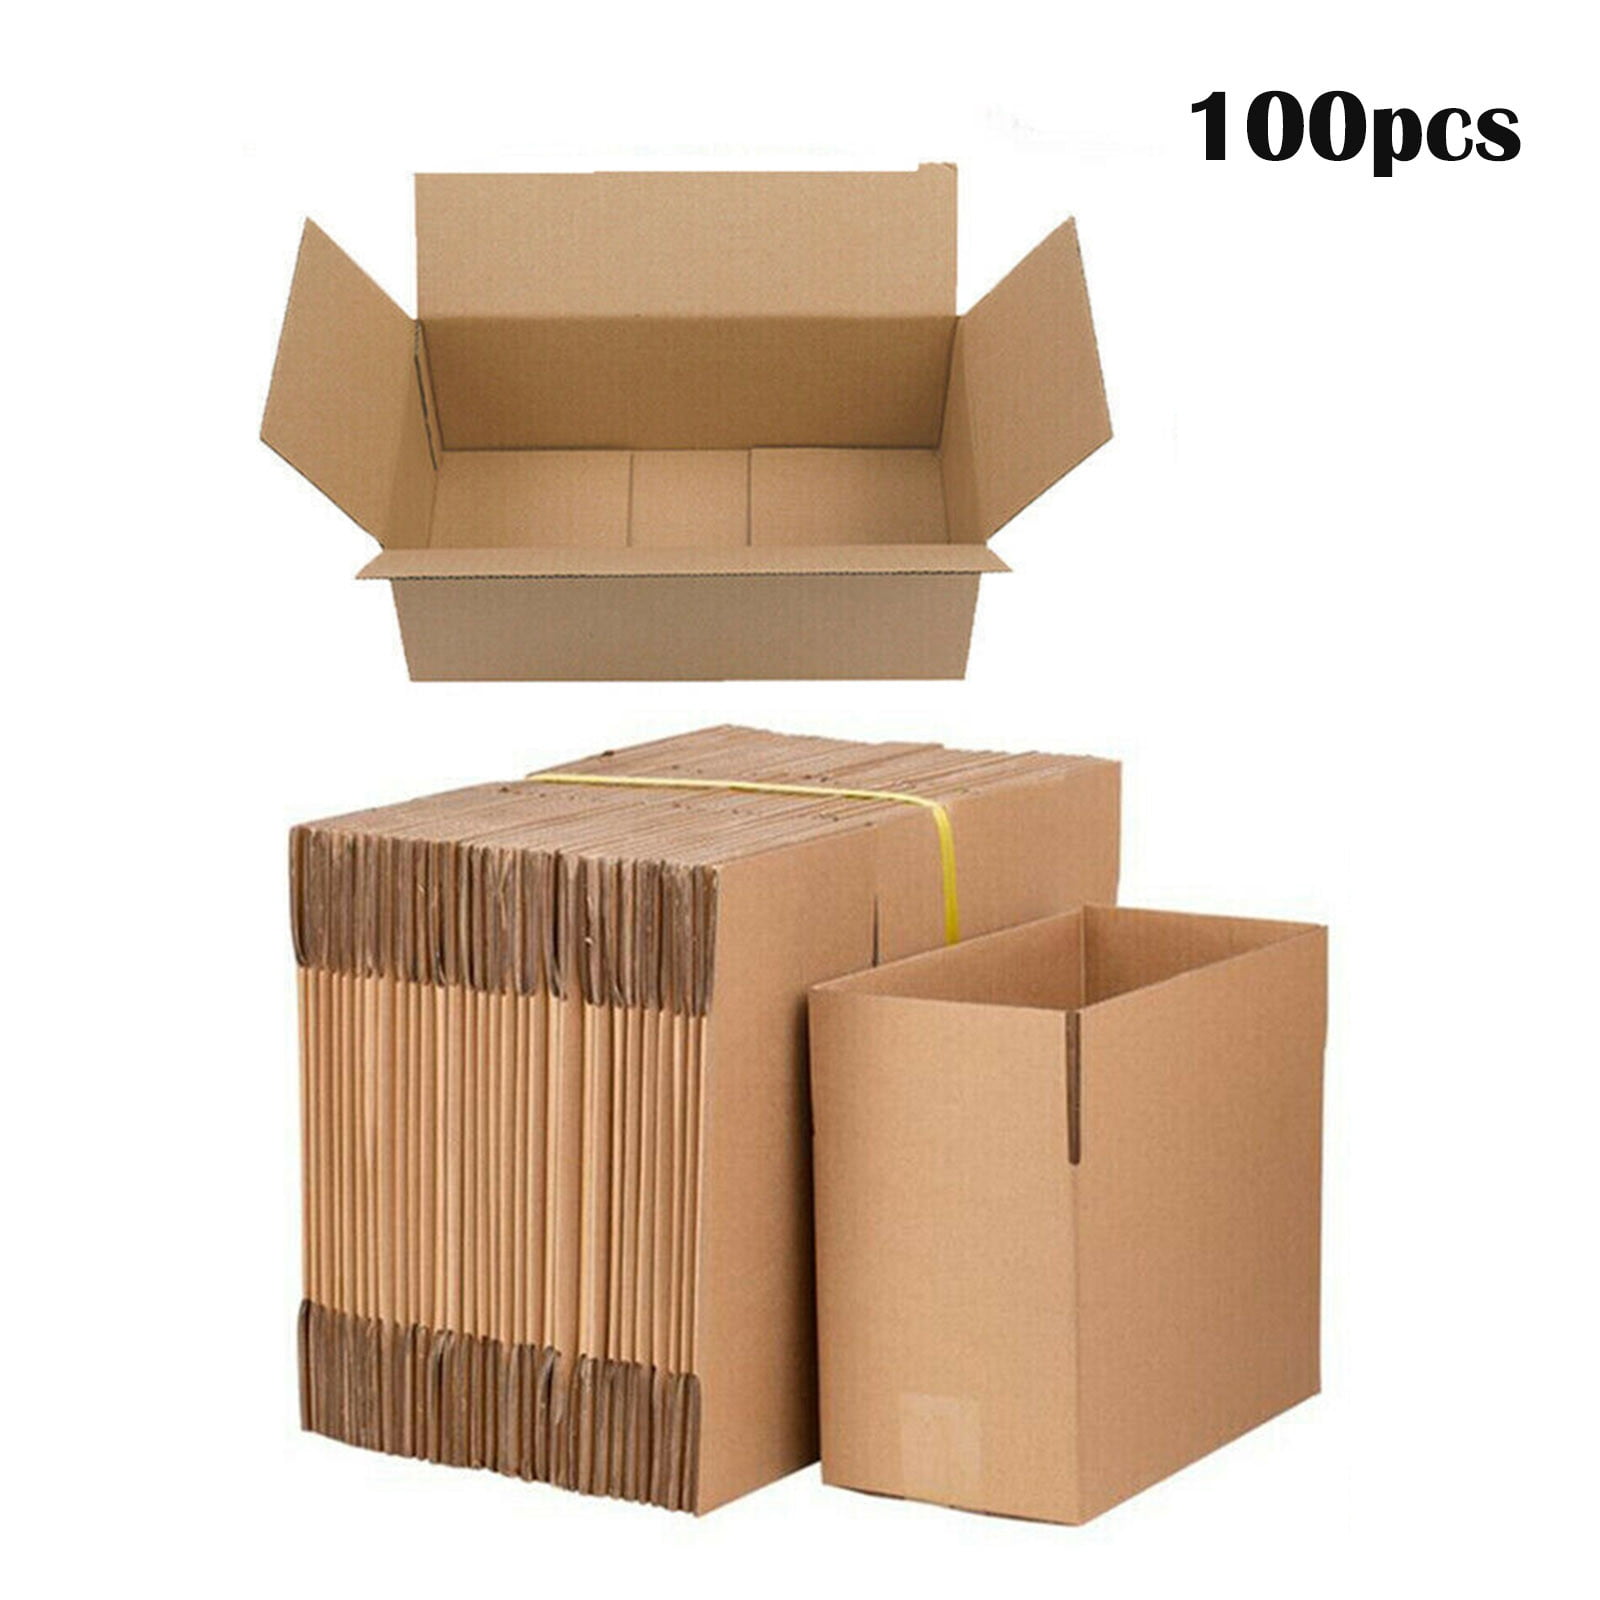 Package ship. Картонный а4. Картон 6б. White Corrugated paper Box. Production of Corrugated Cardboard Packaging.